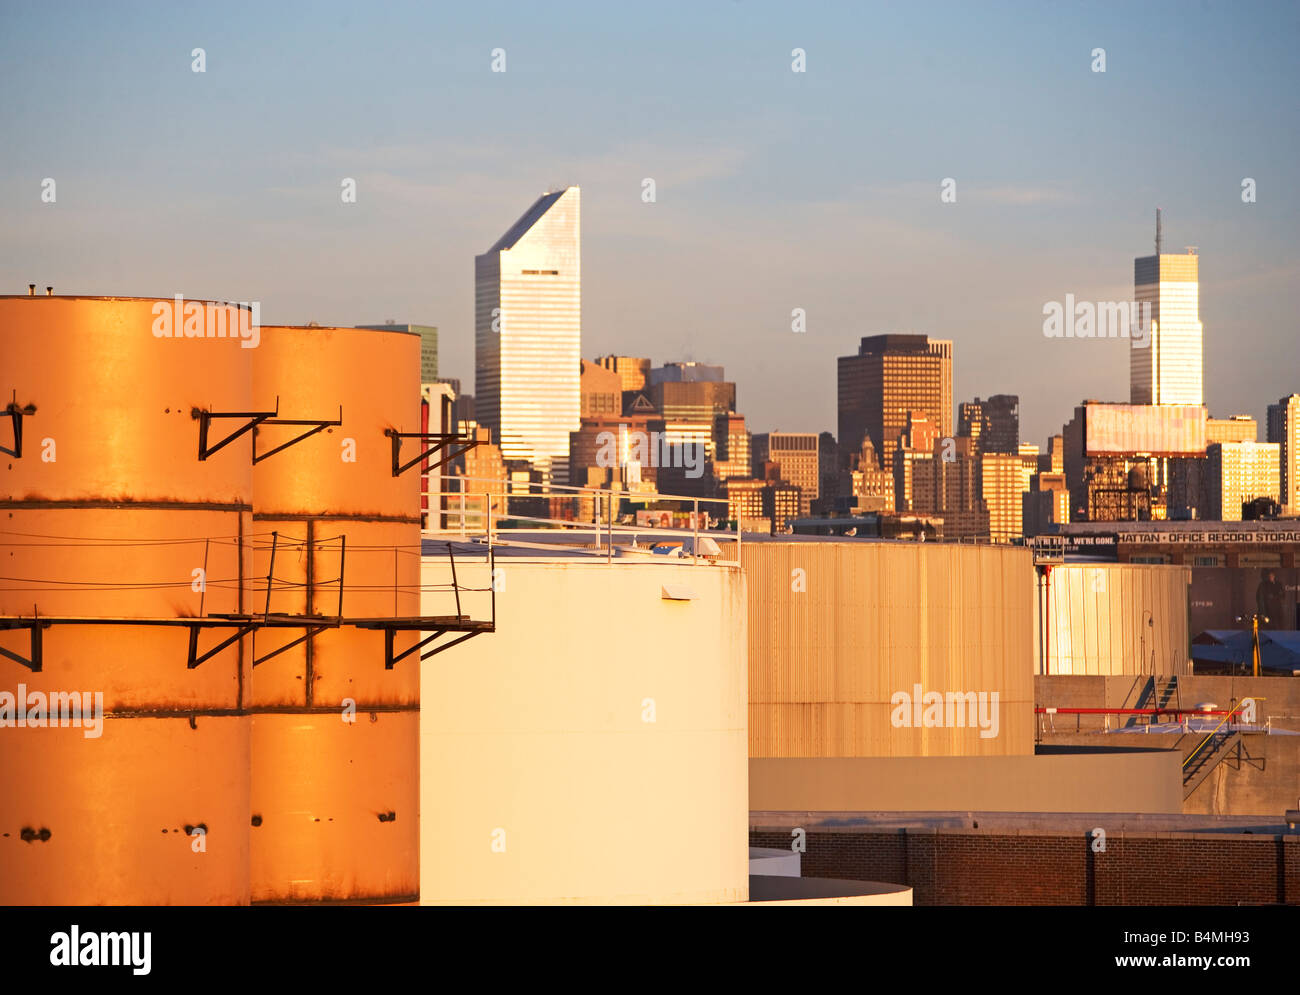 OIL TANKS, FUEL, ENERGY, EXPENSIVE, ARCHITECTURE, WINDOWS, SKYSCRAPER, CLOUDS, TRUMP WORLD TOWER, NEW YORK CITY, EASTSIDE, CLOUD Stock Photo